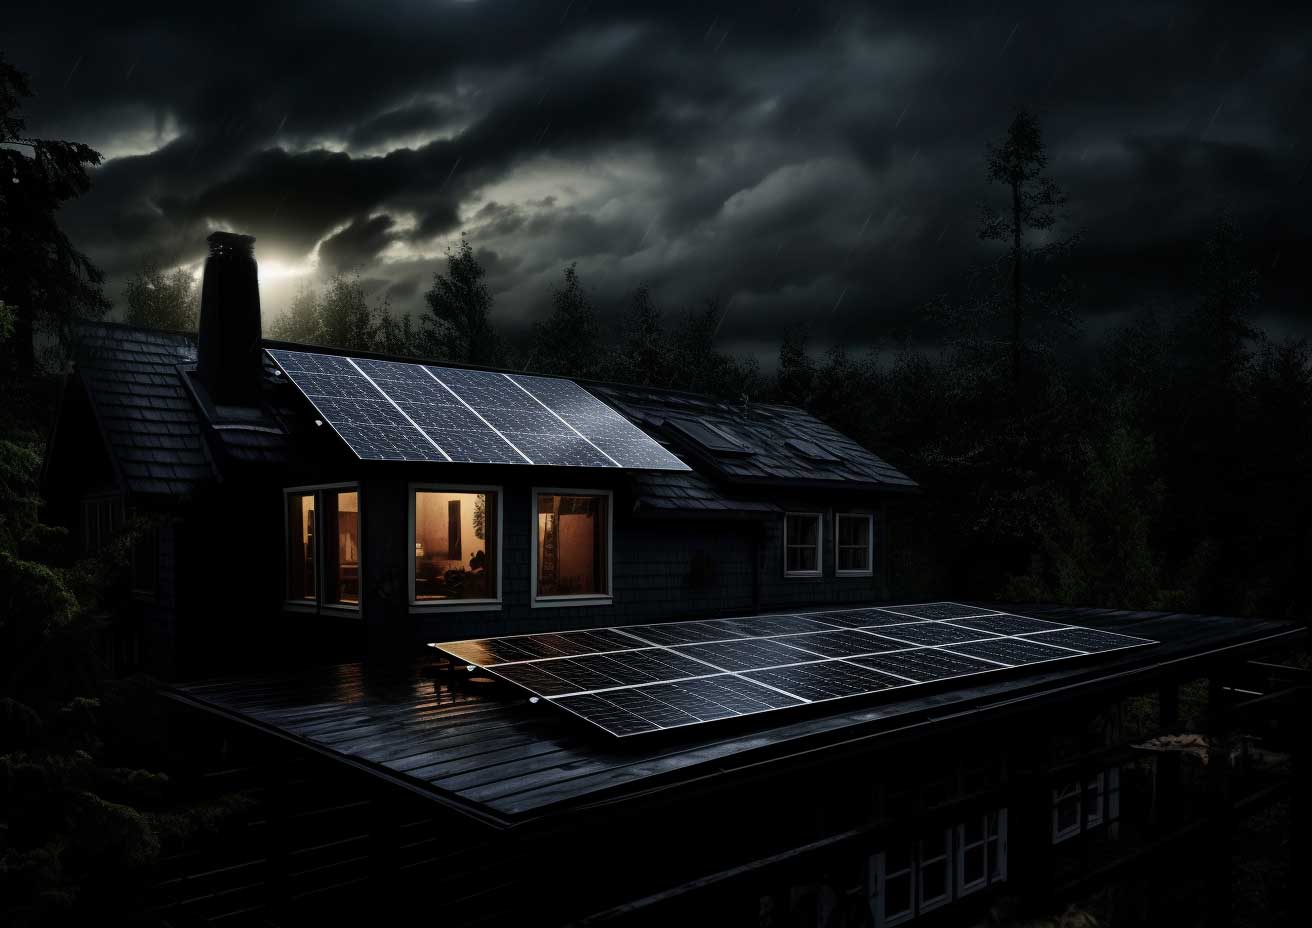 Solar panels on the roof of a house at night, showcasing the disadvantages of solar energy.